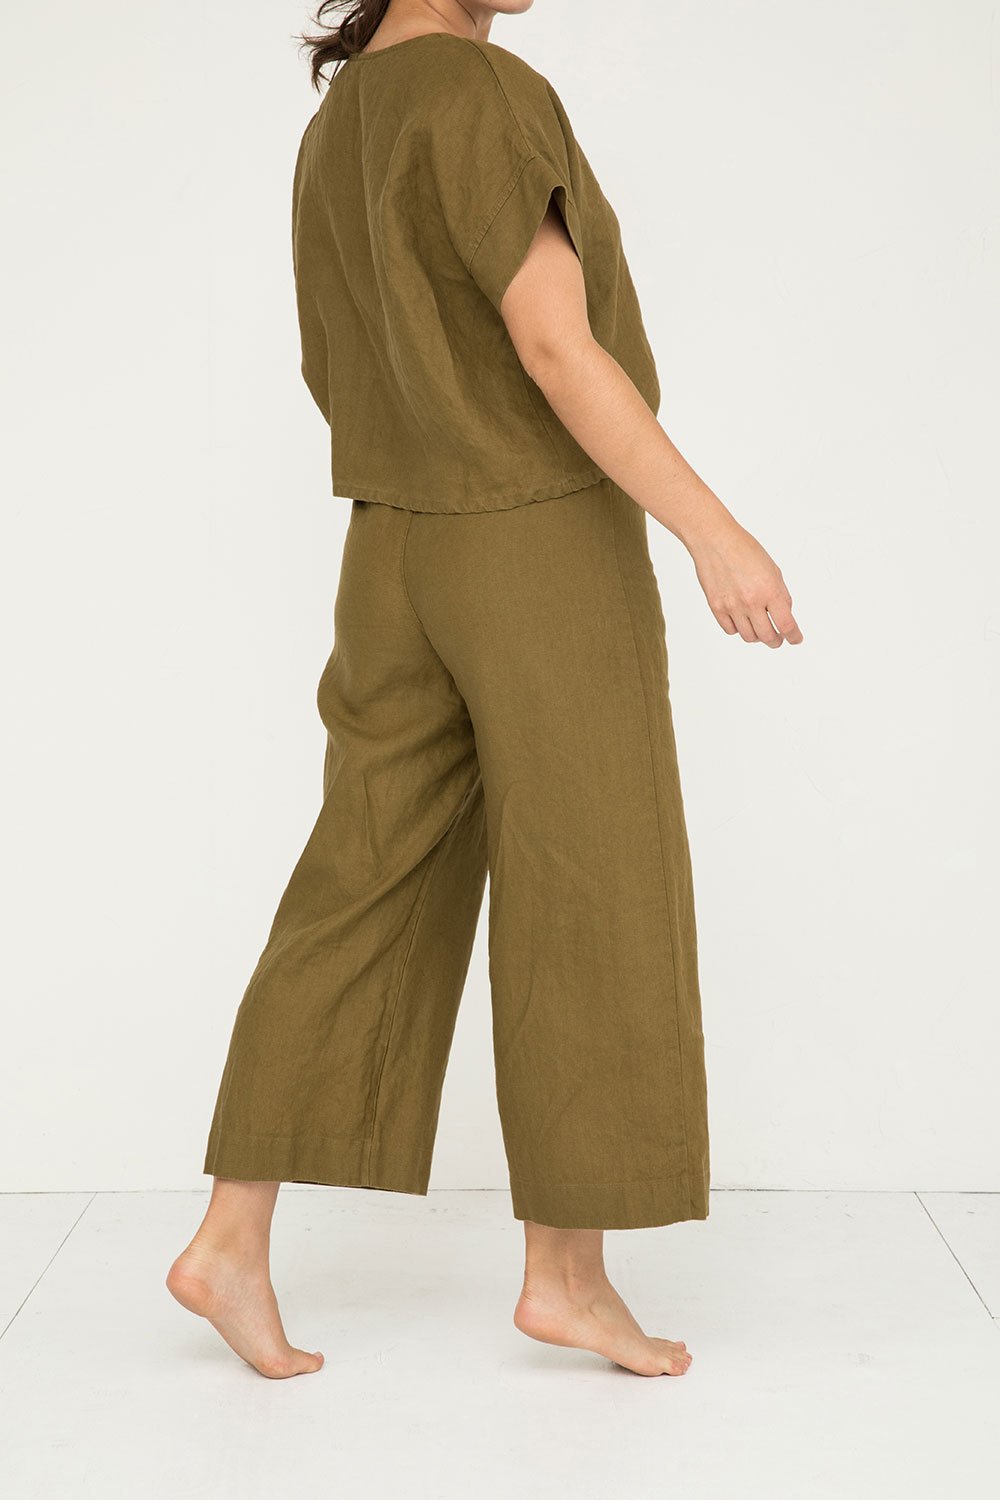 Florence Pant in Midweight Linen Olive#color_olive